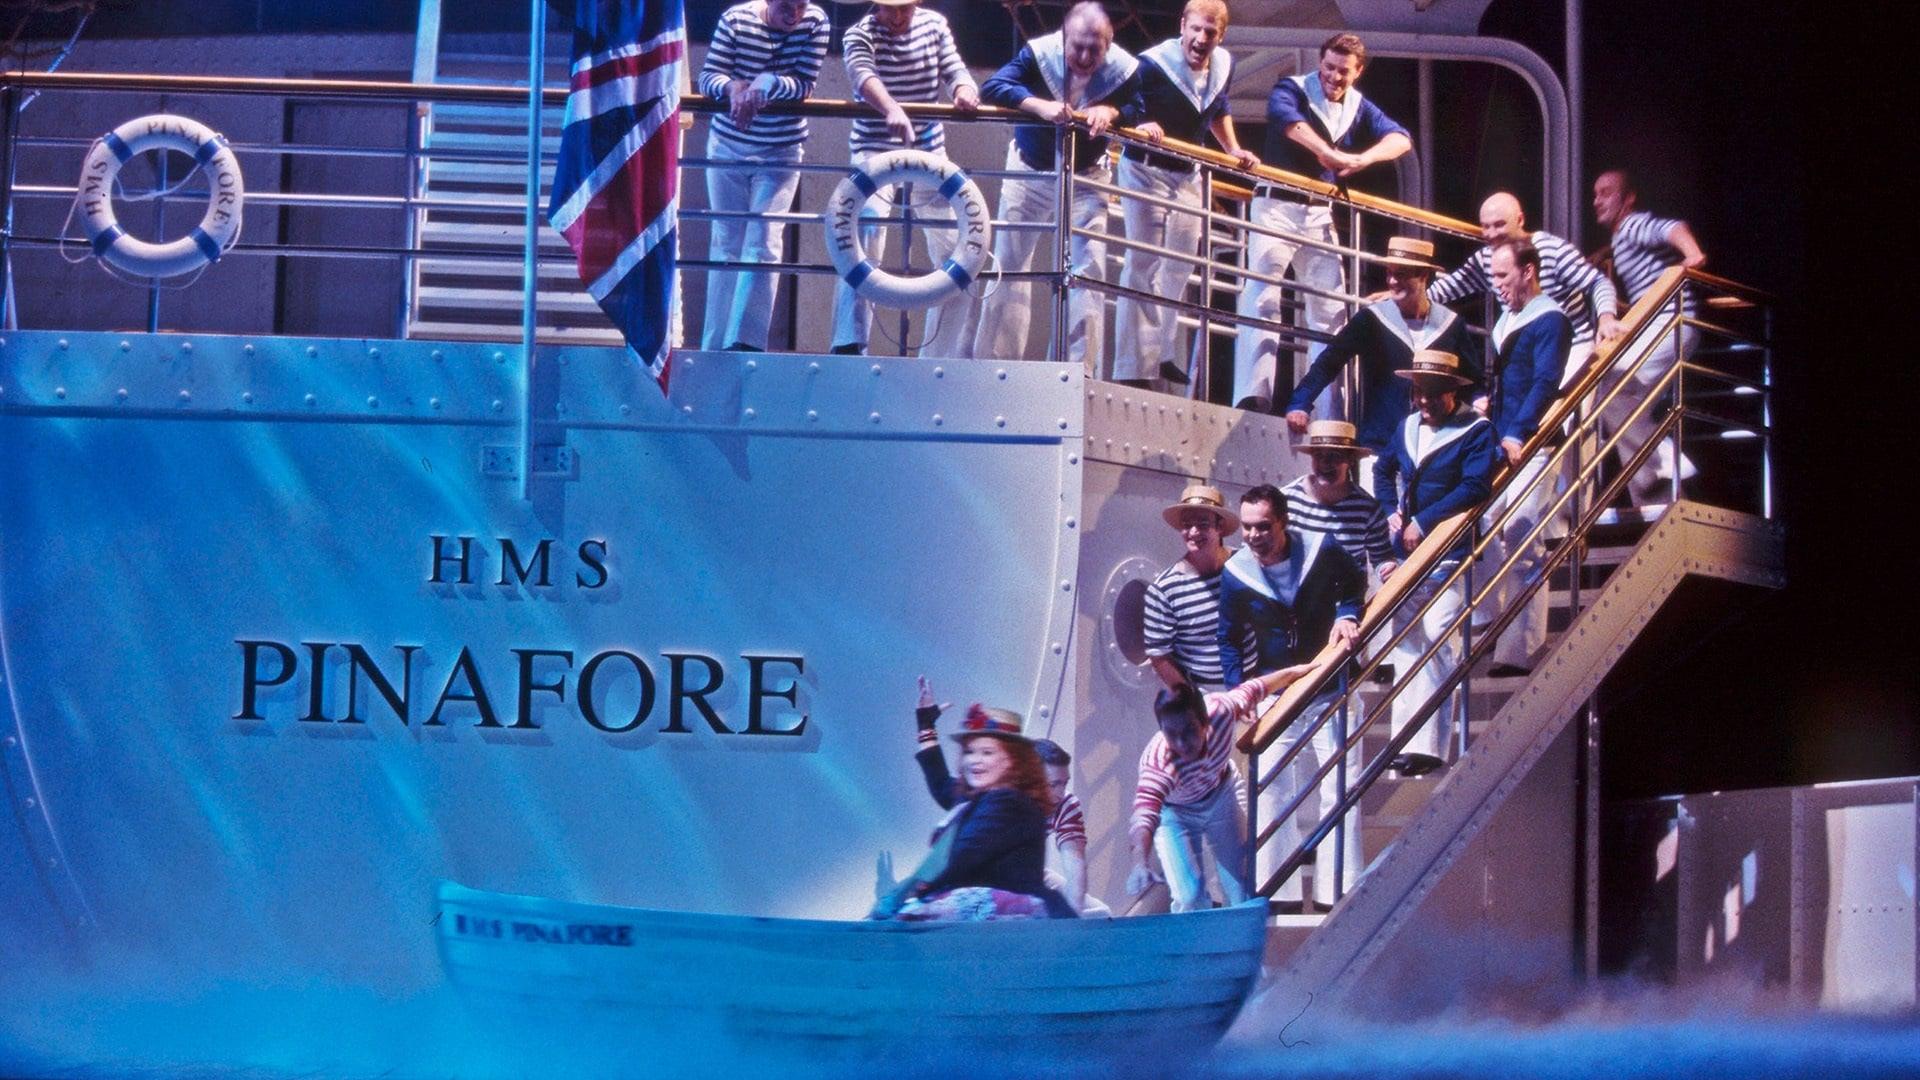 H.M.S. Pinafore and Trial By Jury backdrop